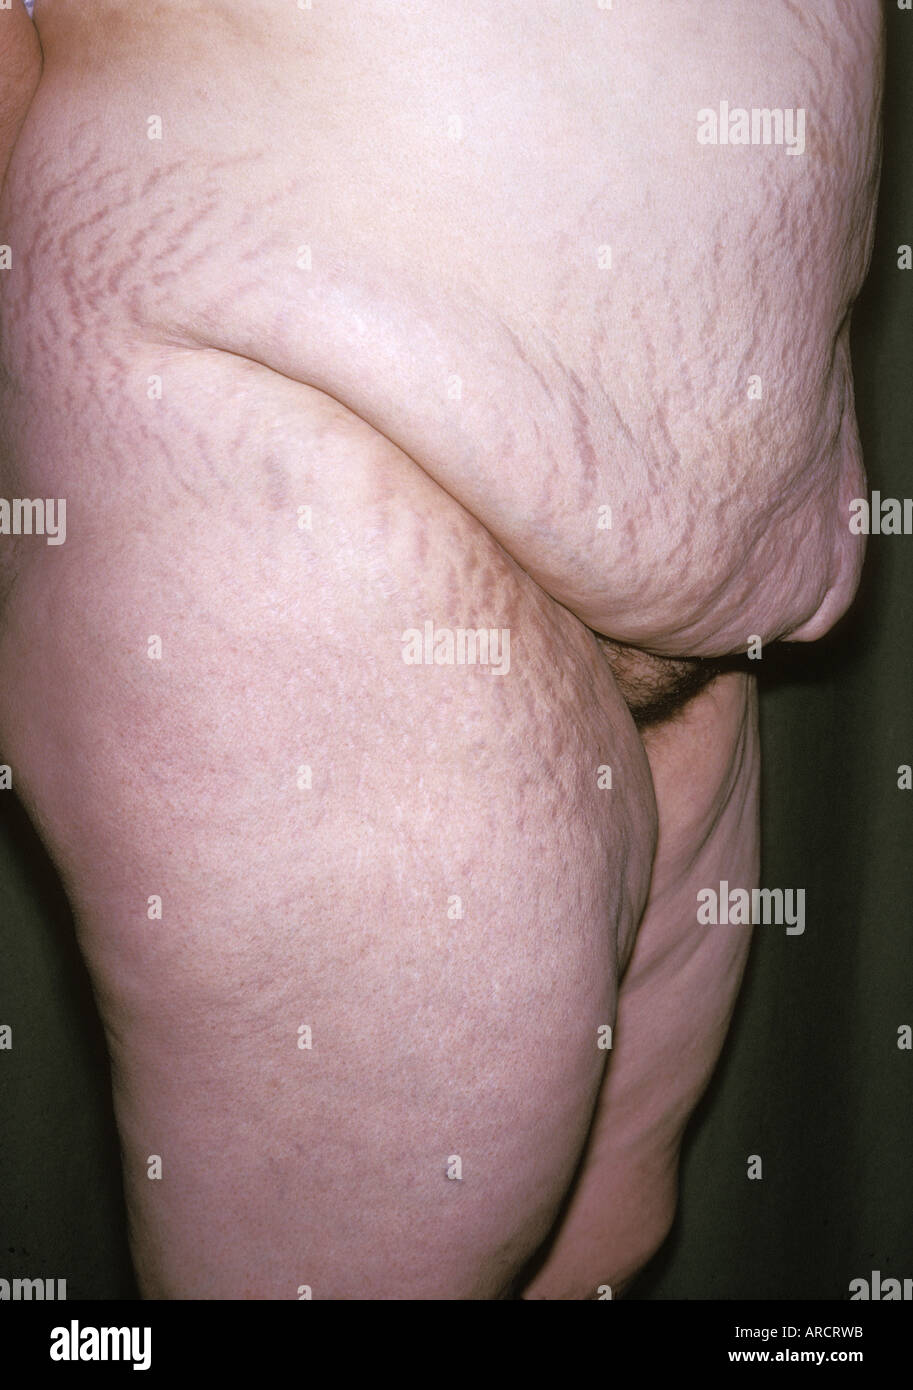 A photograph of an overweight female with lax abdominal muscles and stretchmarks on the abdomen and thighs. Stock Photo